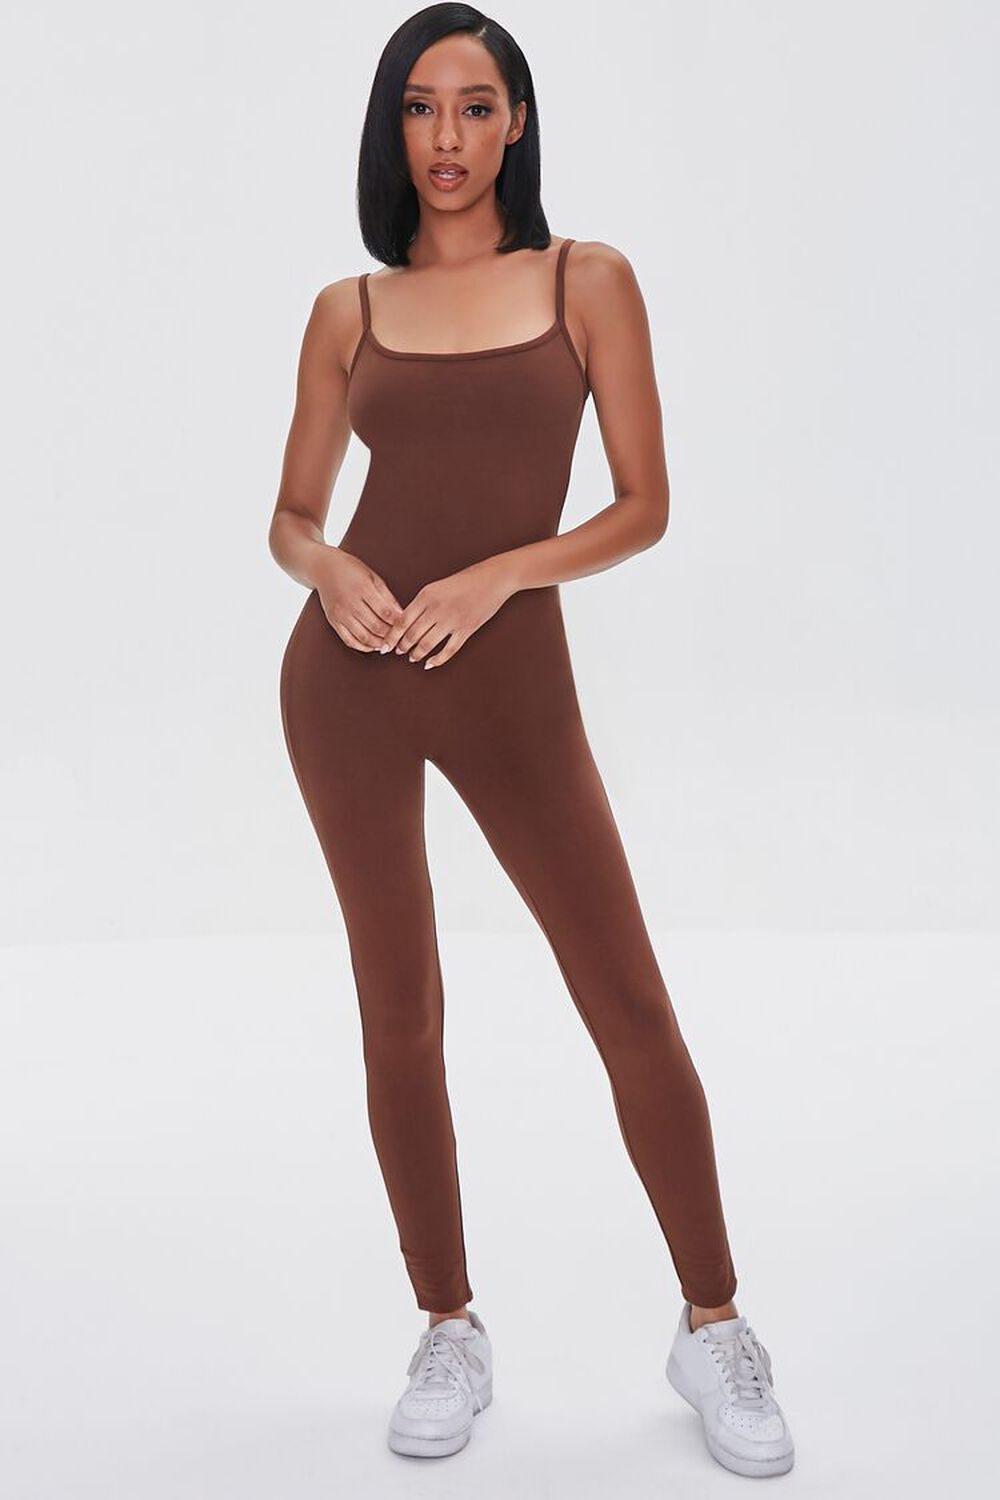 CHOCOLATE Fitted Cami Jumpsuit, image 1